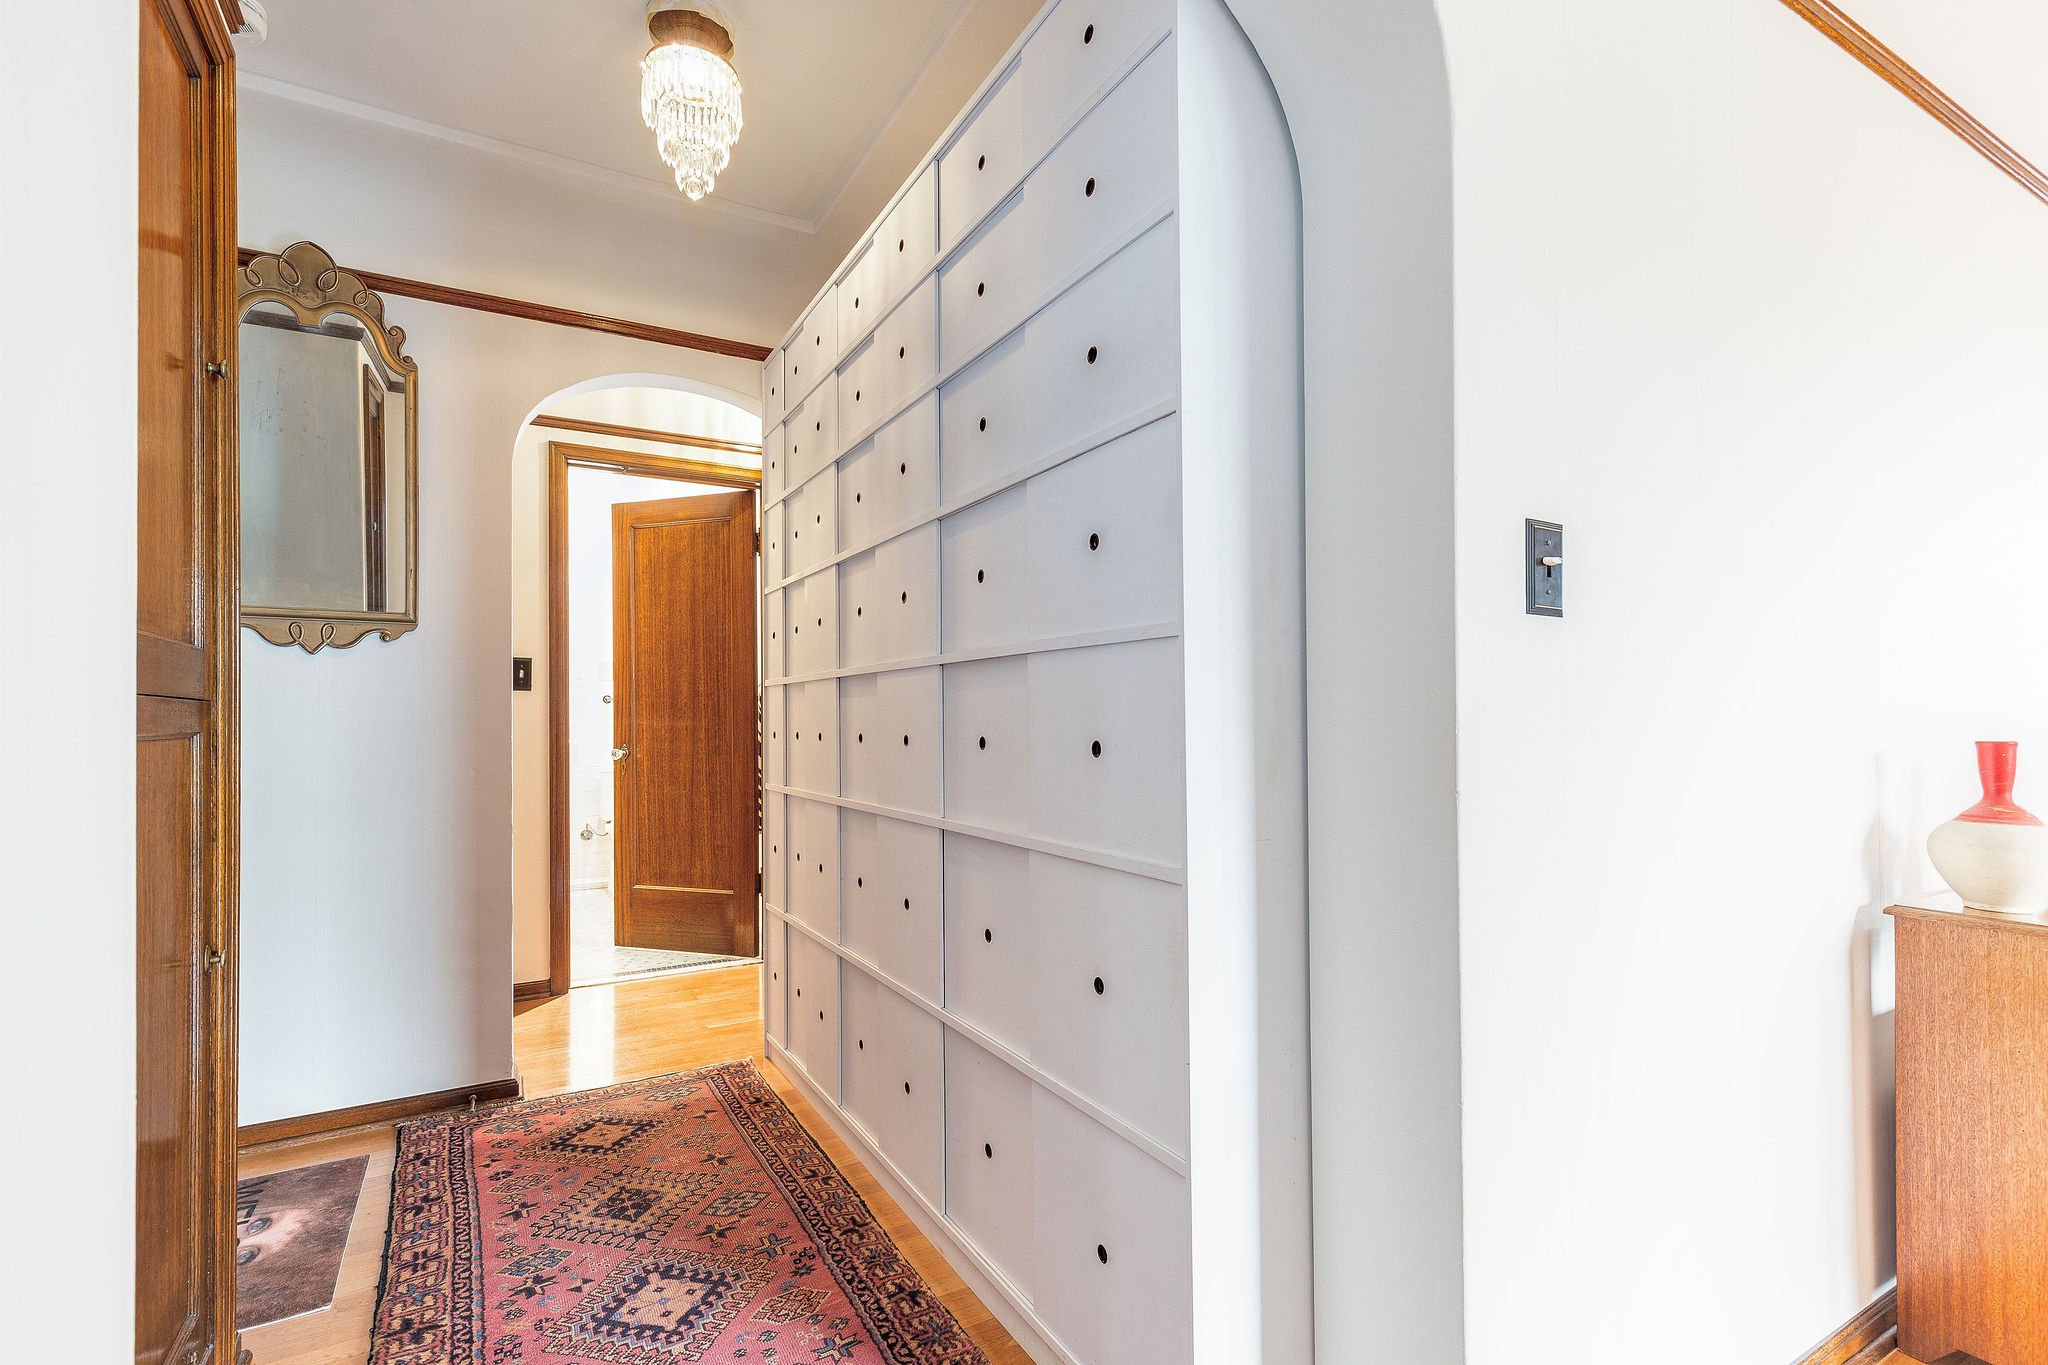 This home has ample storage with 8 closets and cabinets. Period detail includes mahogany doors, trim and molding, oak floors and octagonal fluted glass doorknobs. 